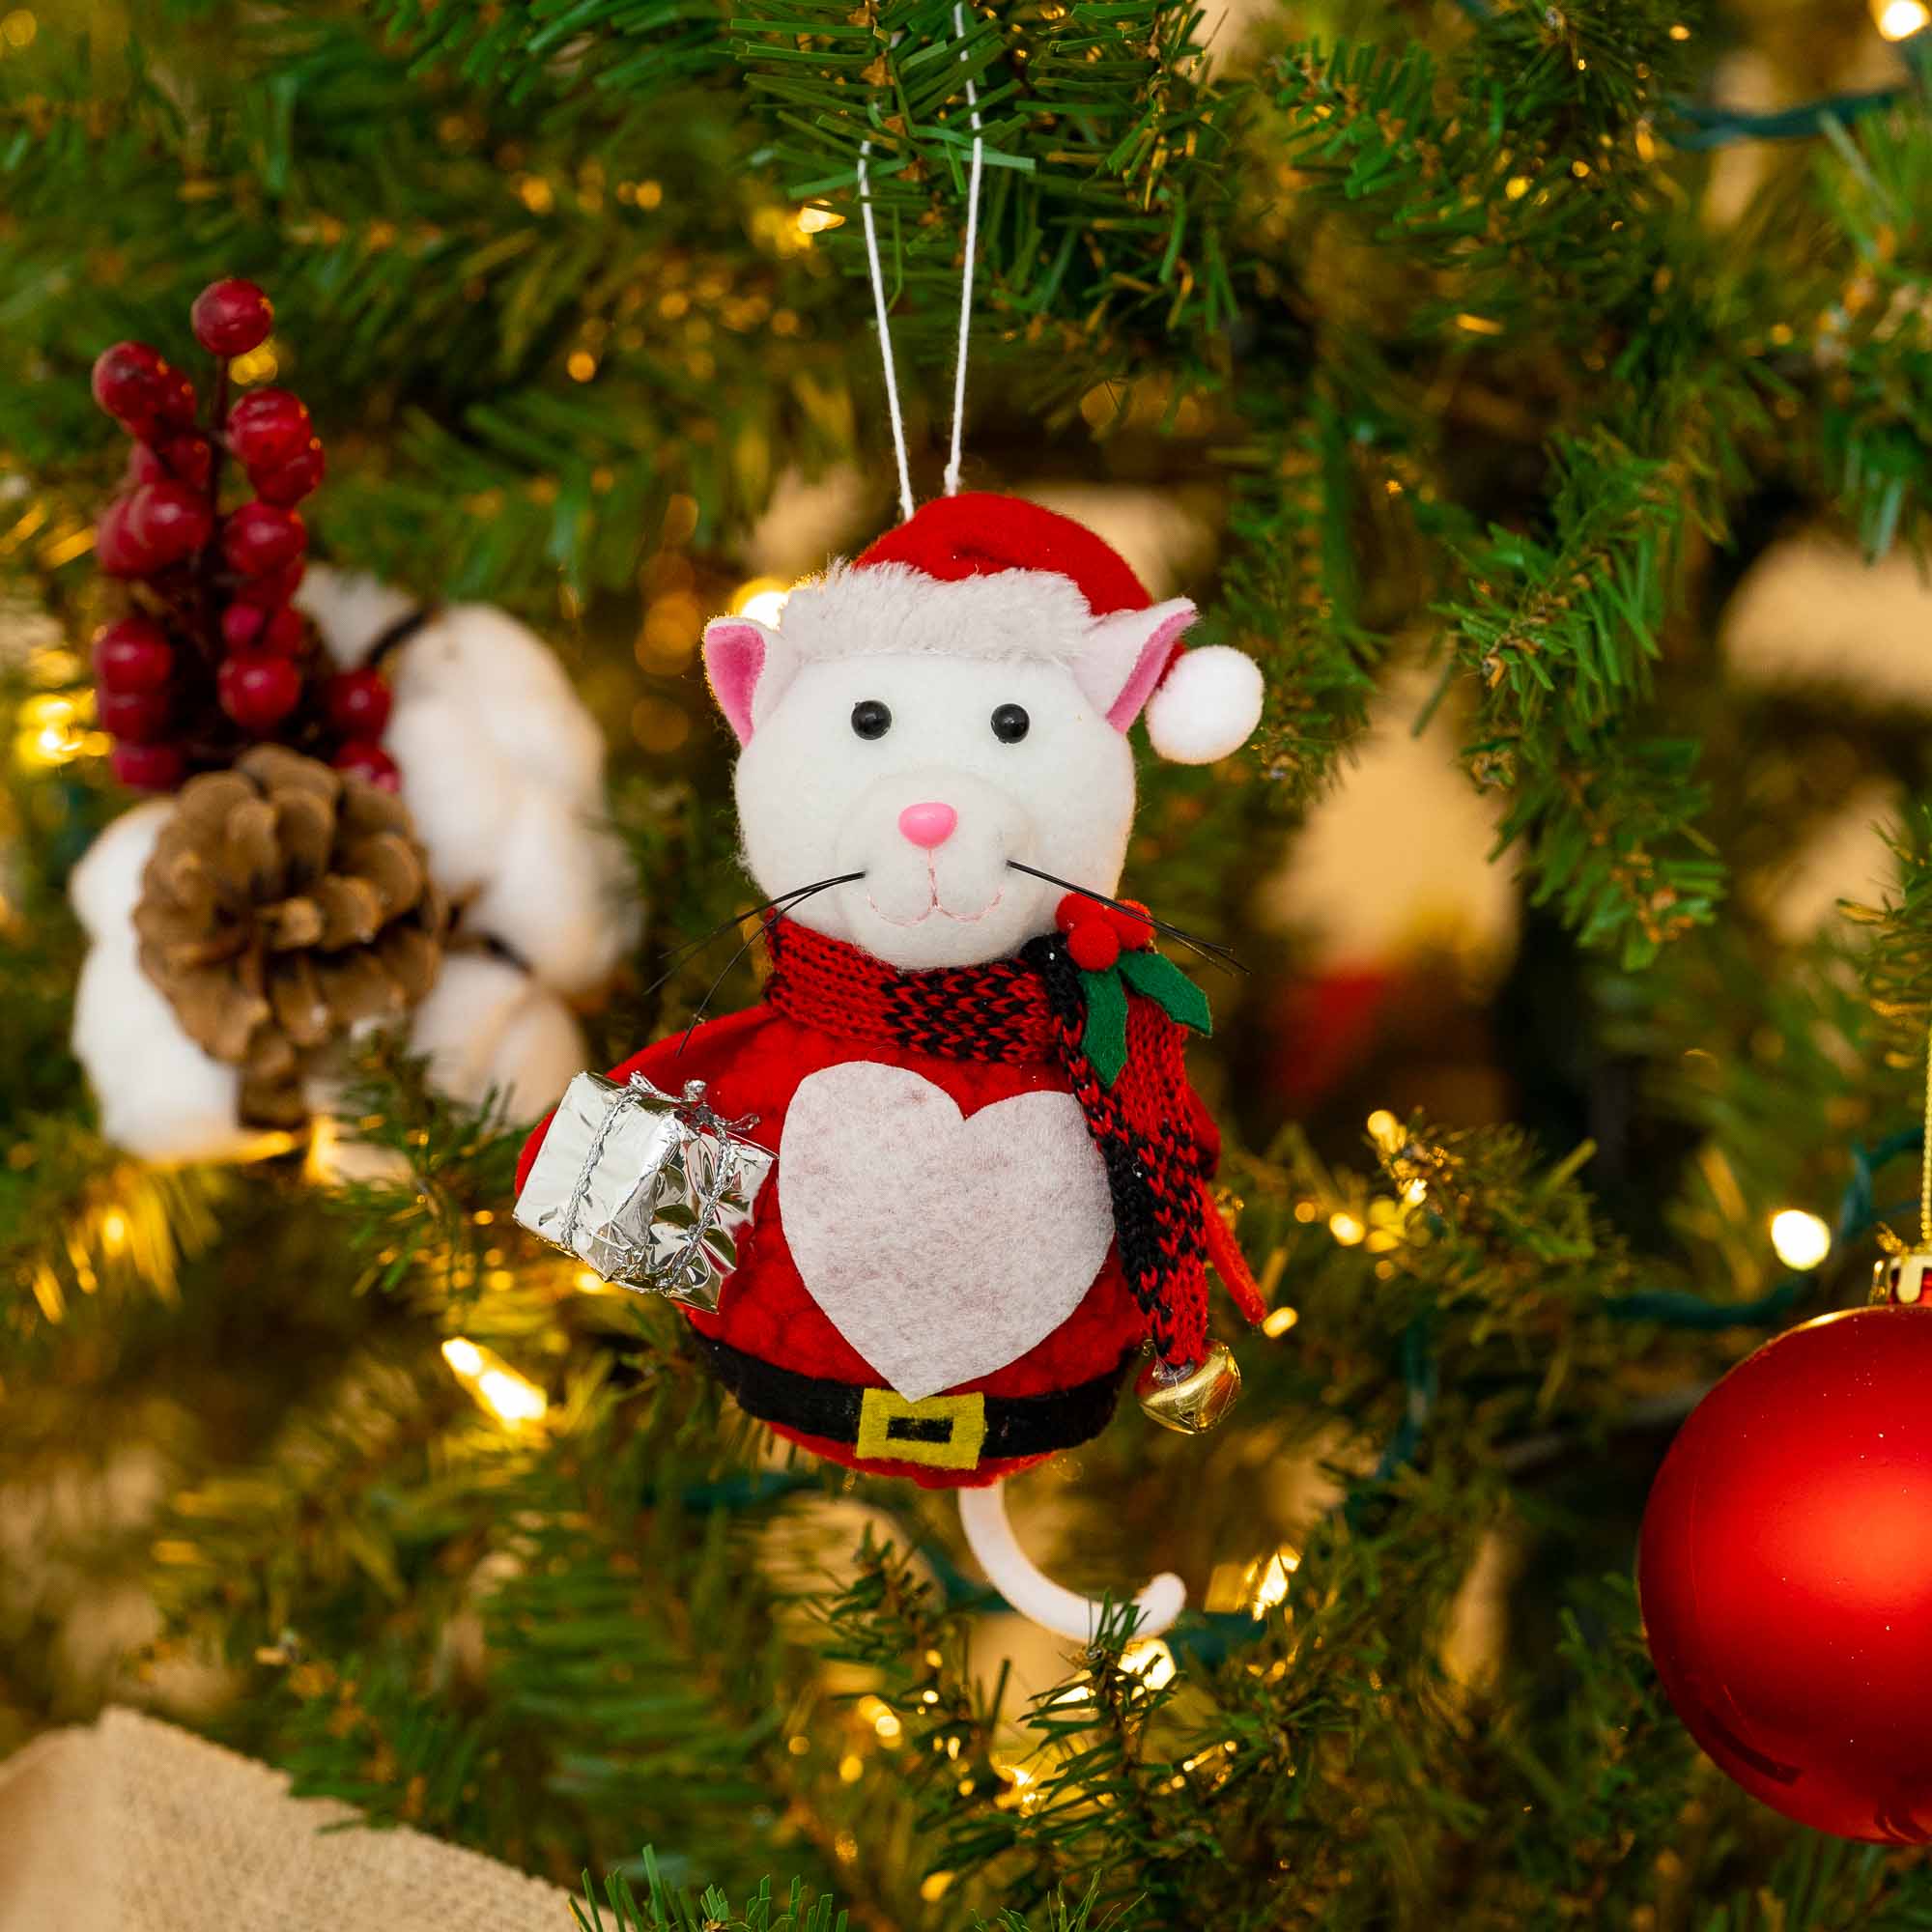 Jolly The Rescue Kitty Christmas Cat Ornament (4" Tall) – Buy 1 Get 68% Off or Collect All 3 for $14.97